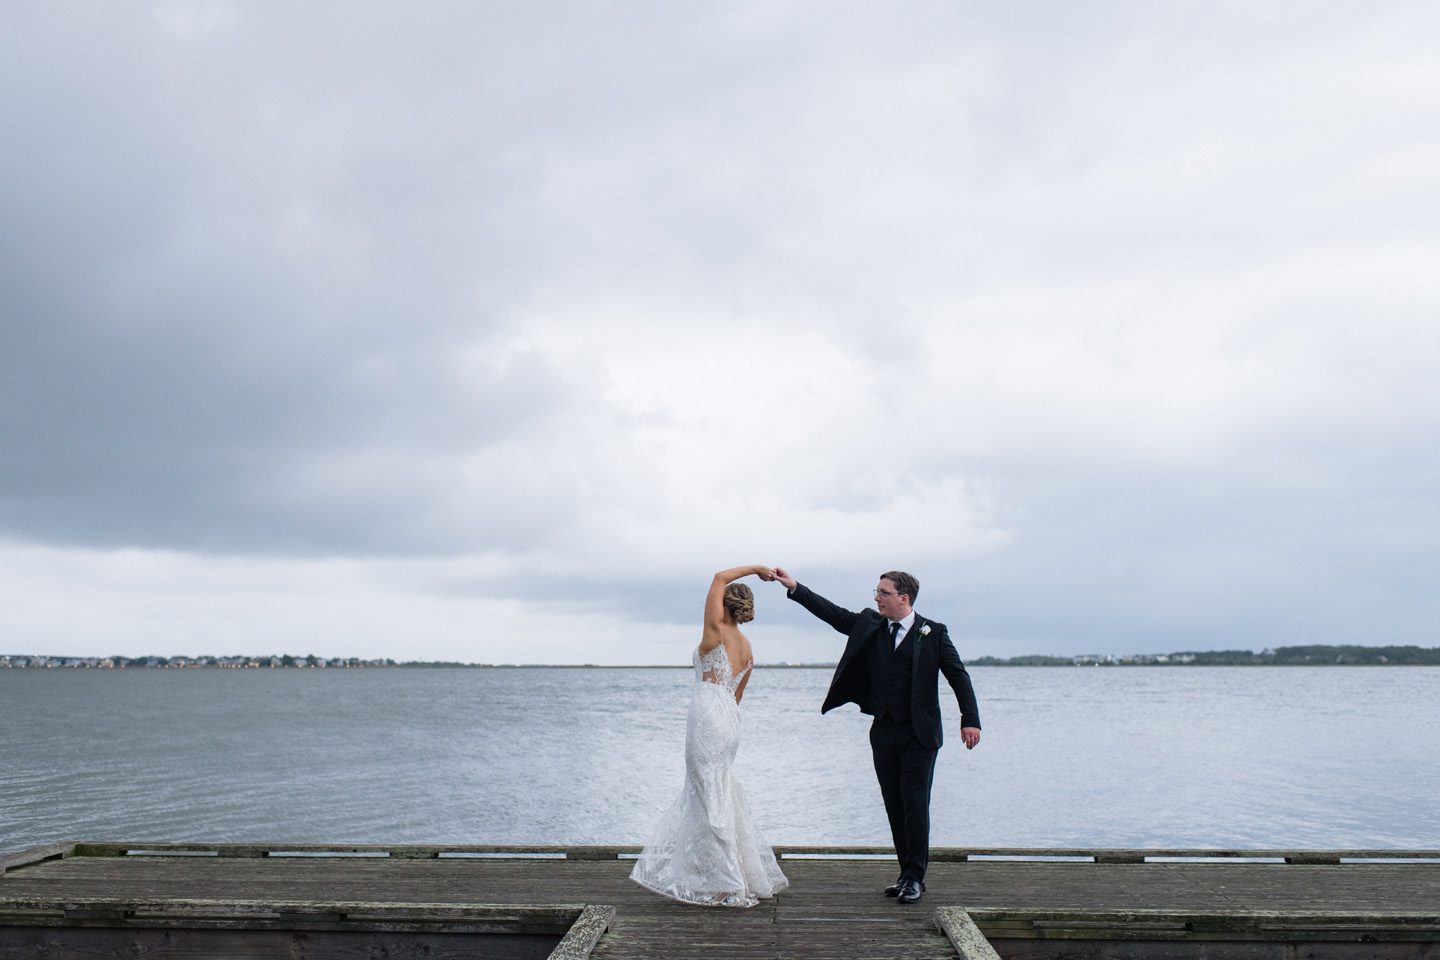 Outer Banks wedding at Festival Park in Manteo